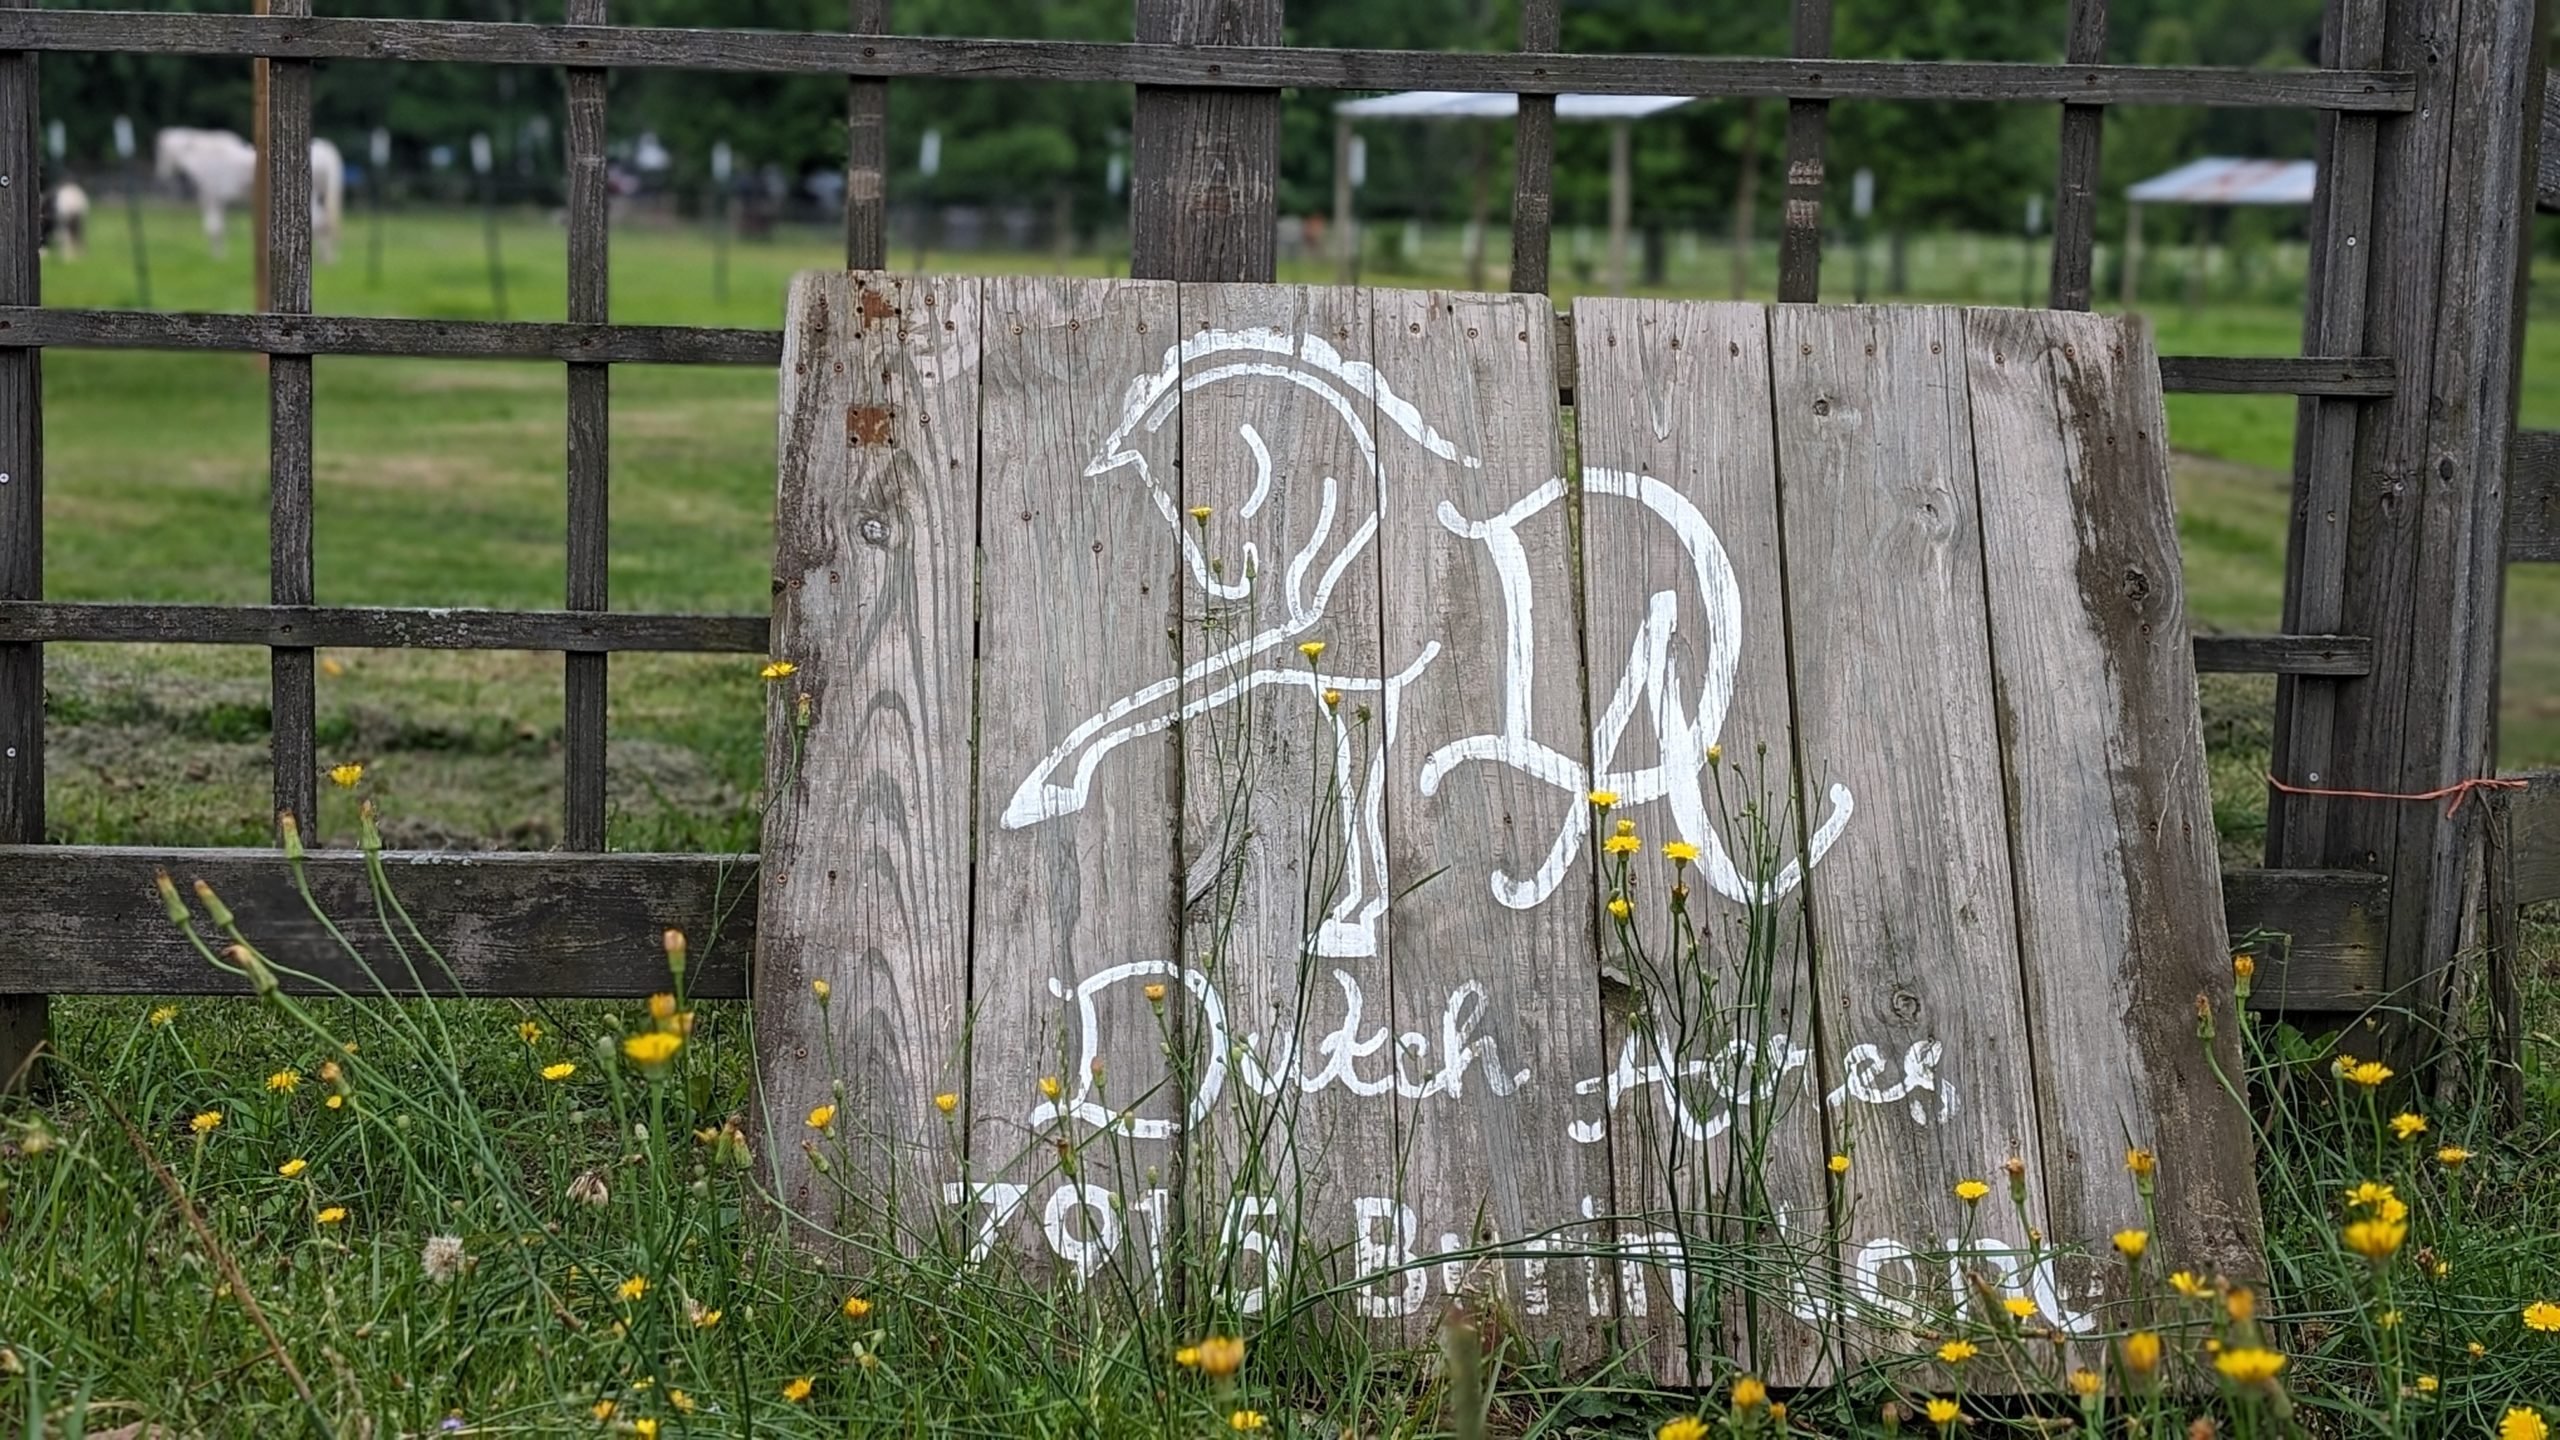 The Healing Power of Horses: Dutch Acres Farm Inspires and Empowers Riders of All Abilities